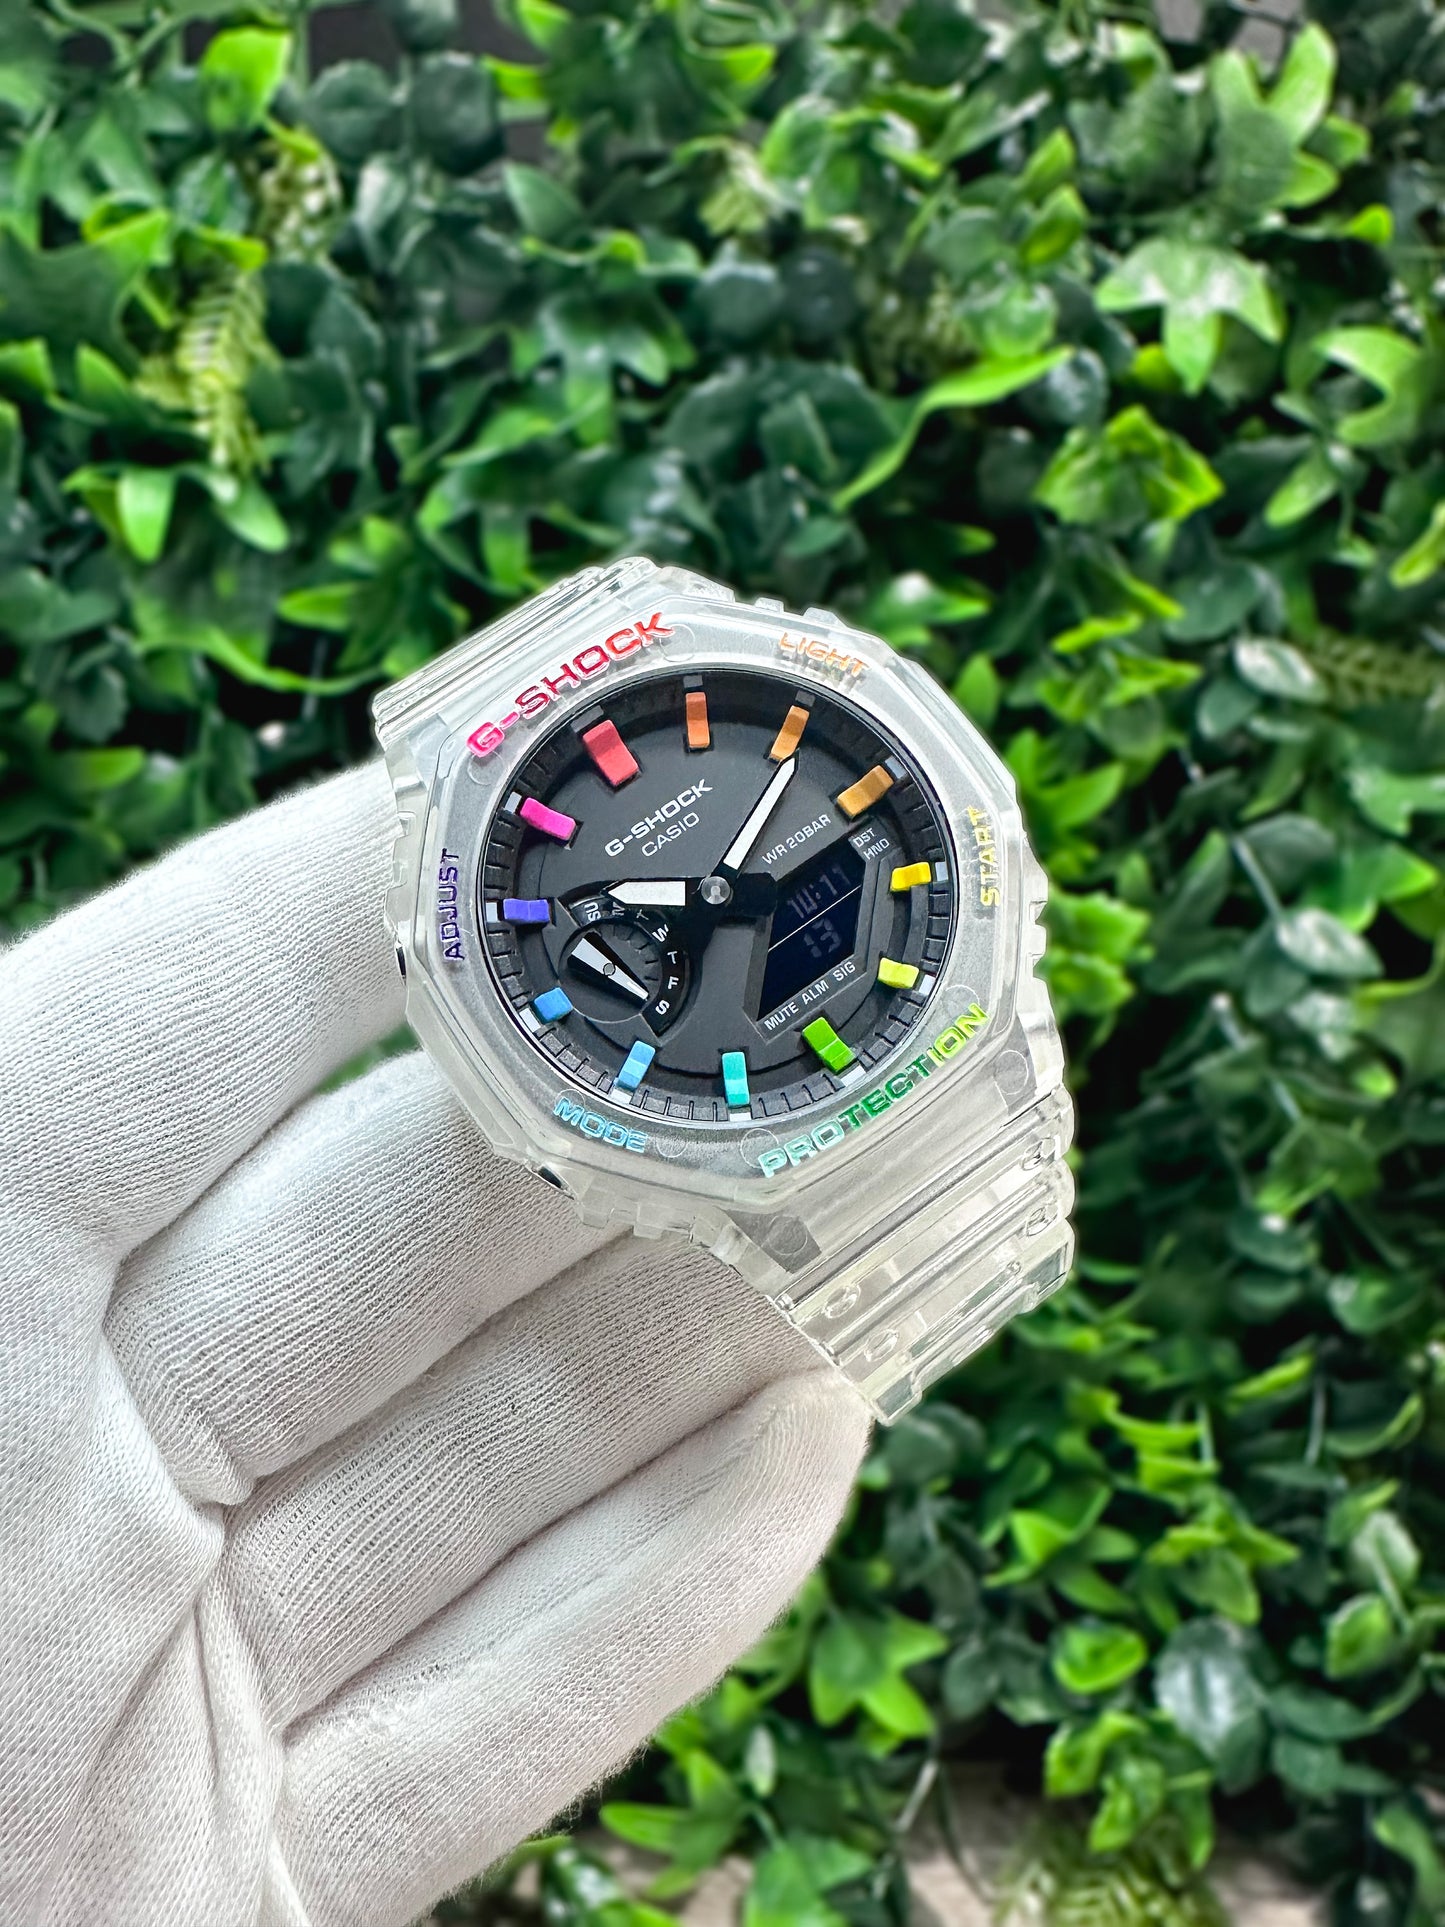 G-Shock CasiOak "Rainbow Jelly" - Clear/Rainbow Hand Painted Genuine Casio GA2100 - Carbon Core Protection - Optional Sapphire Crystal